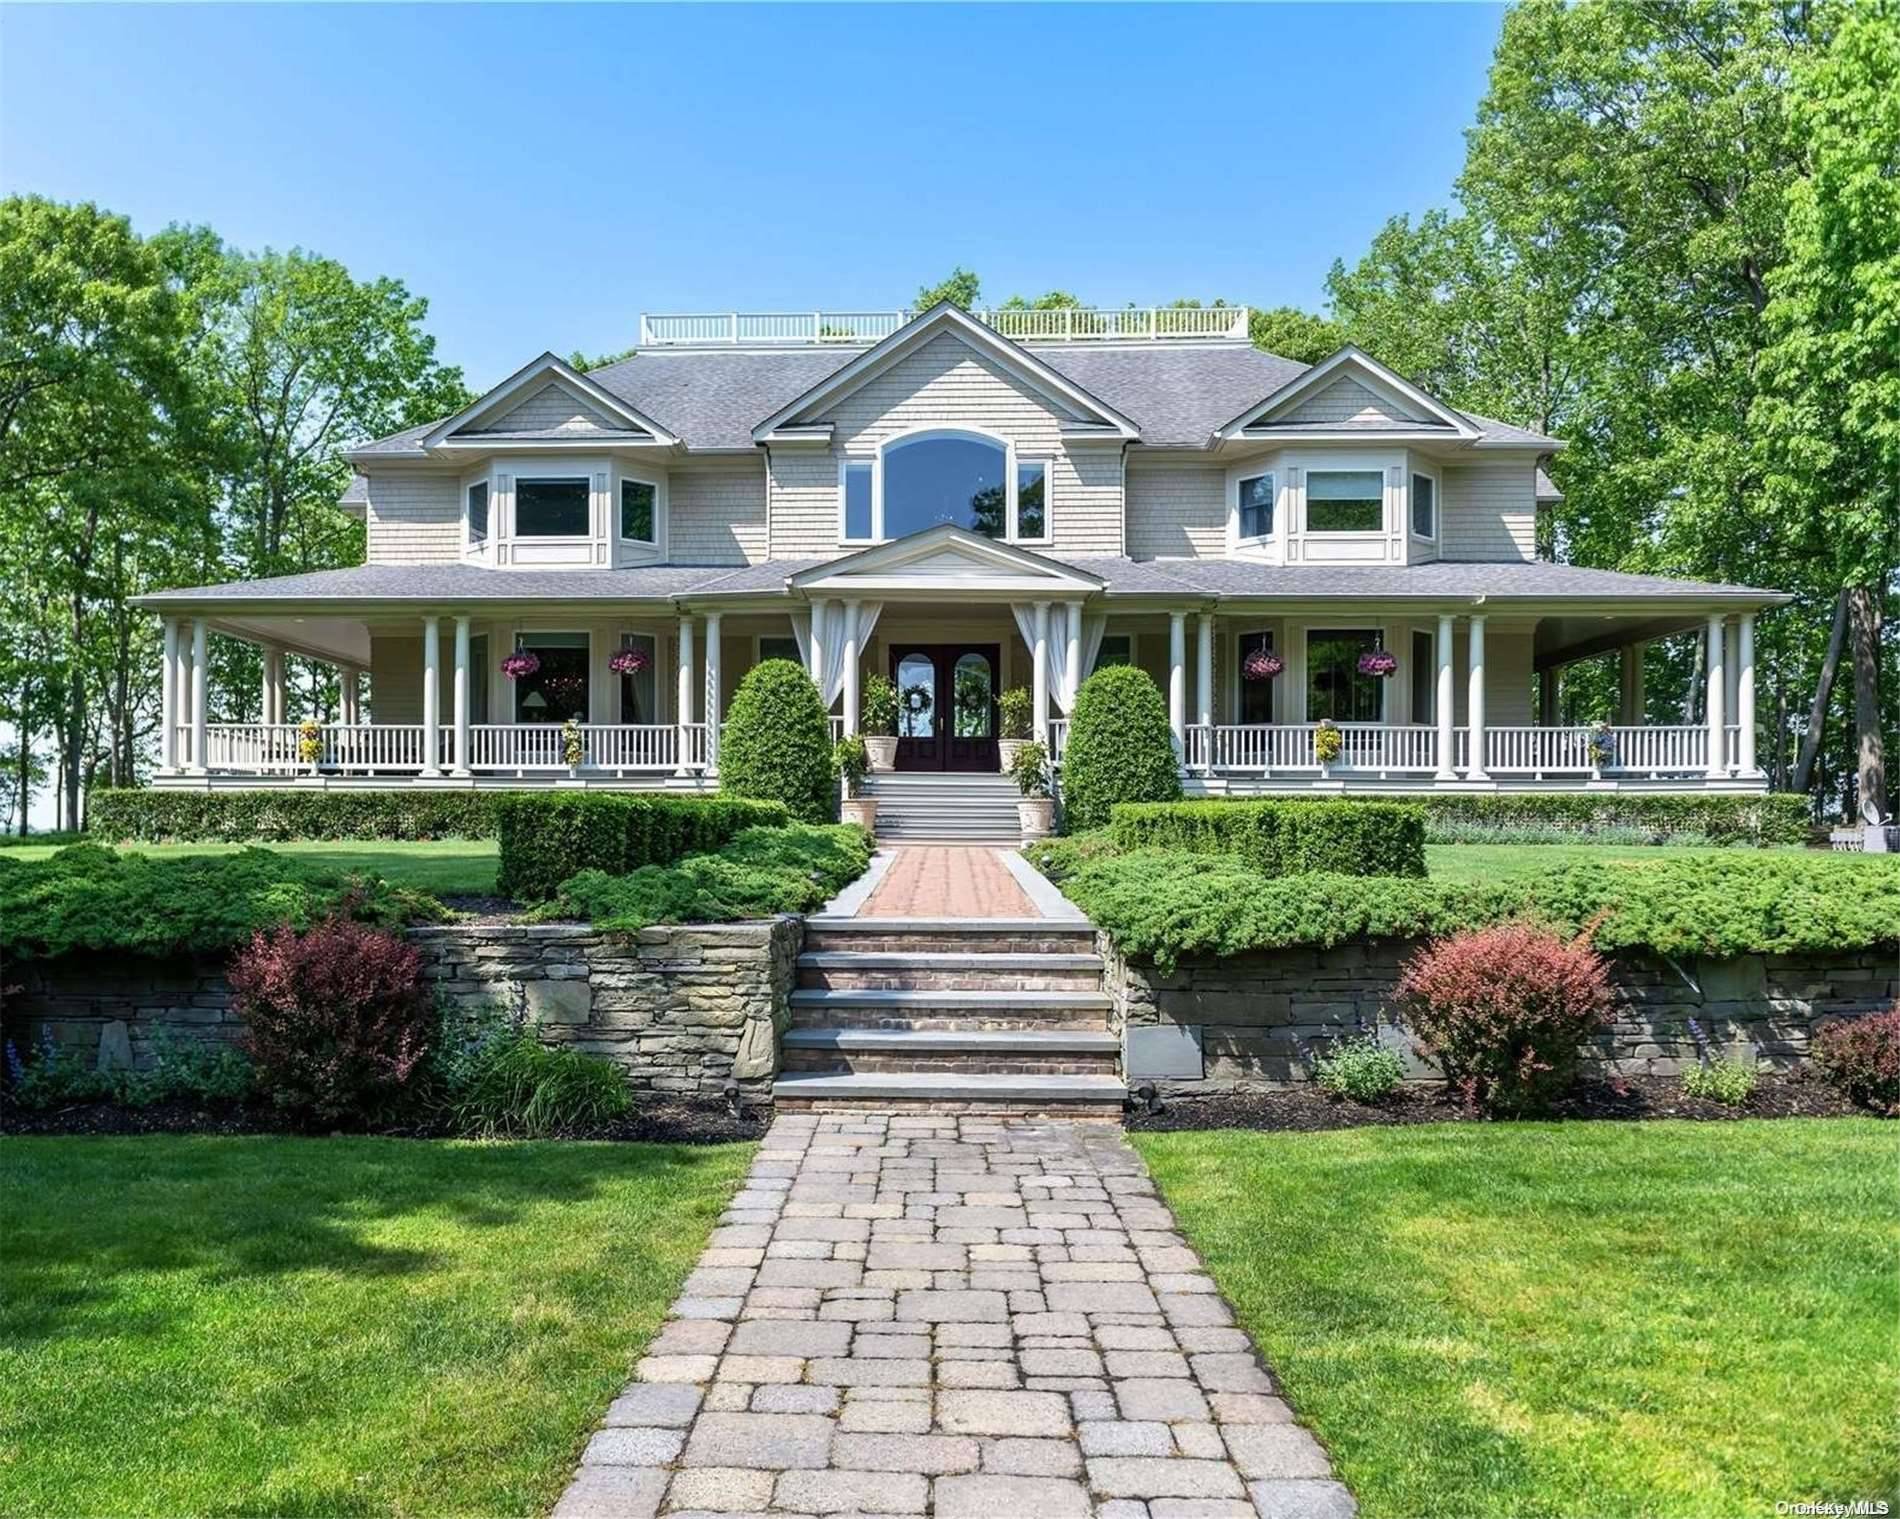 Discover the charm of waterfront living on this 8 acre estate along Southold Bay, boasting 157 feet of pristine shoreline and a private beach for tranquil retreats.